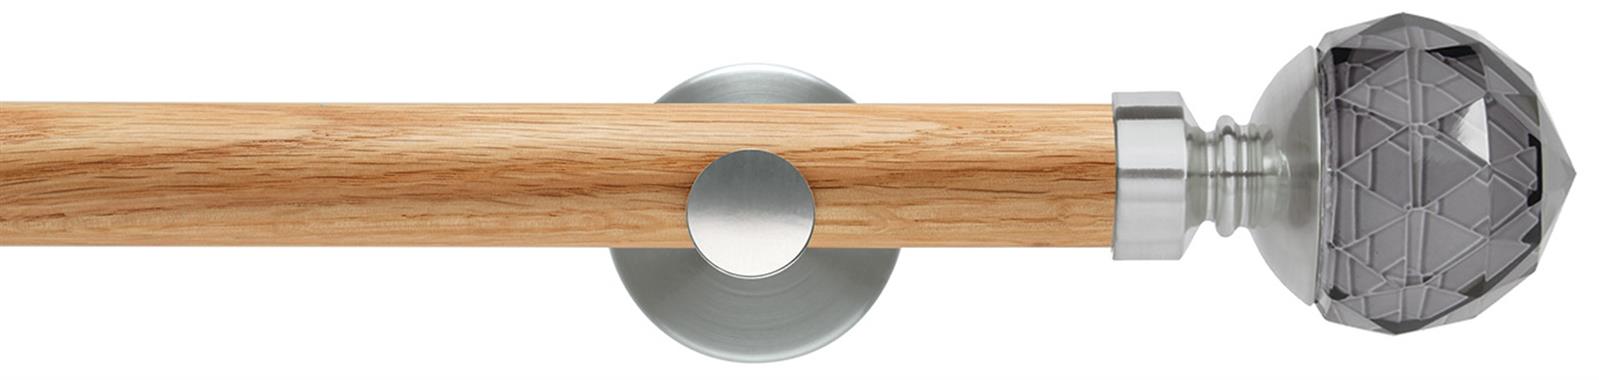 Neo 28mm Oak Wood Eyelet Pole, Stainless Steel, Smoke Grey Faceted Ball